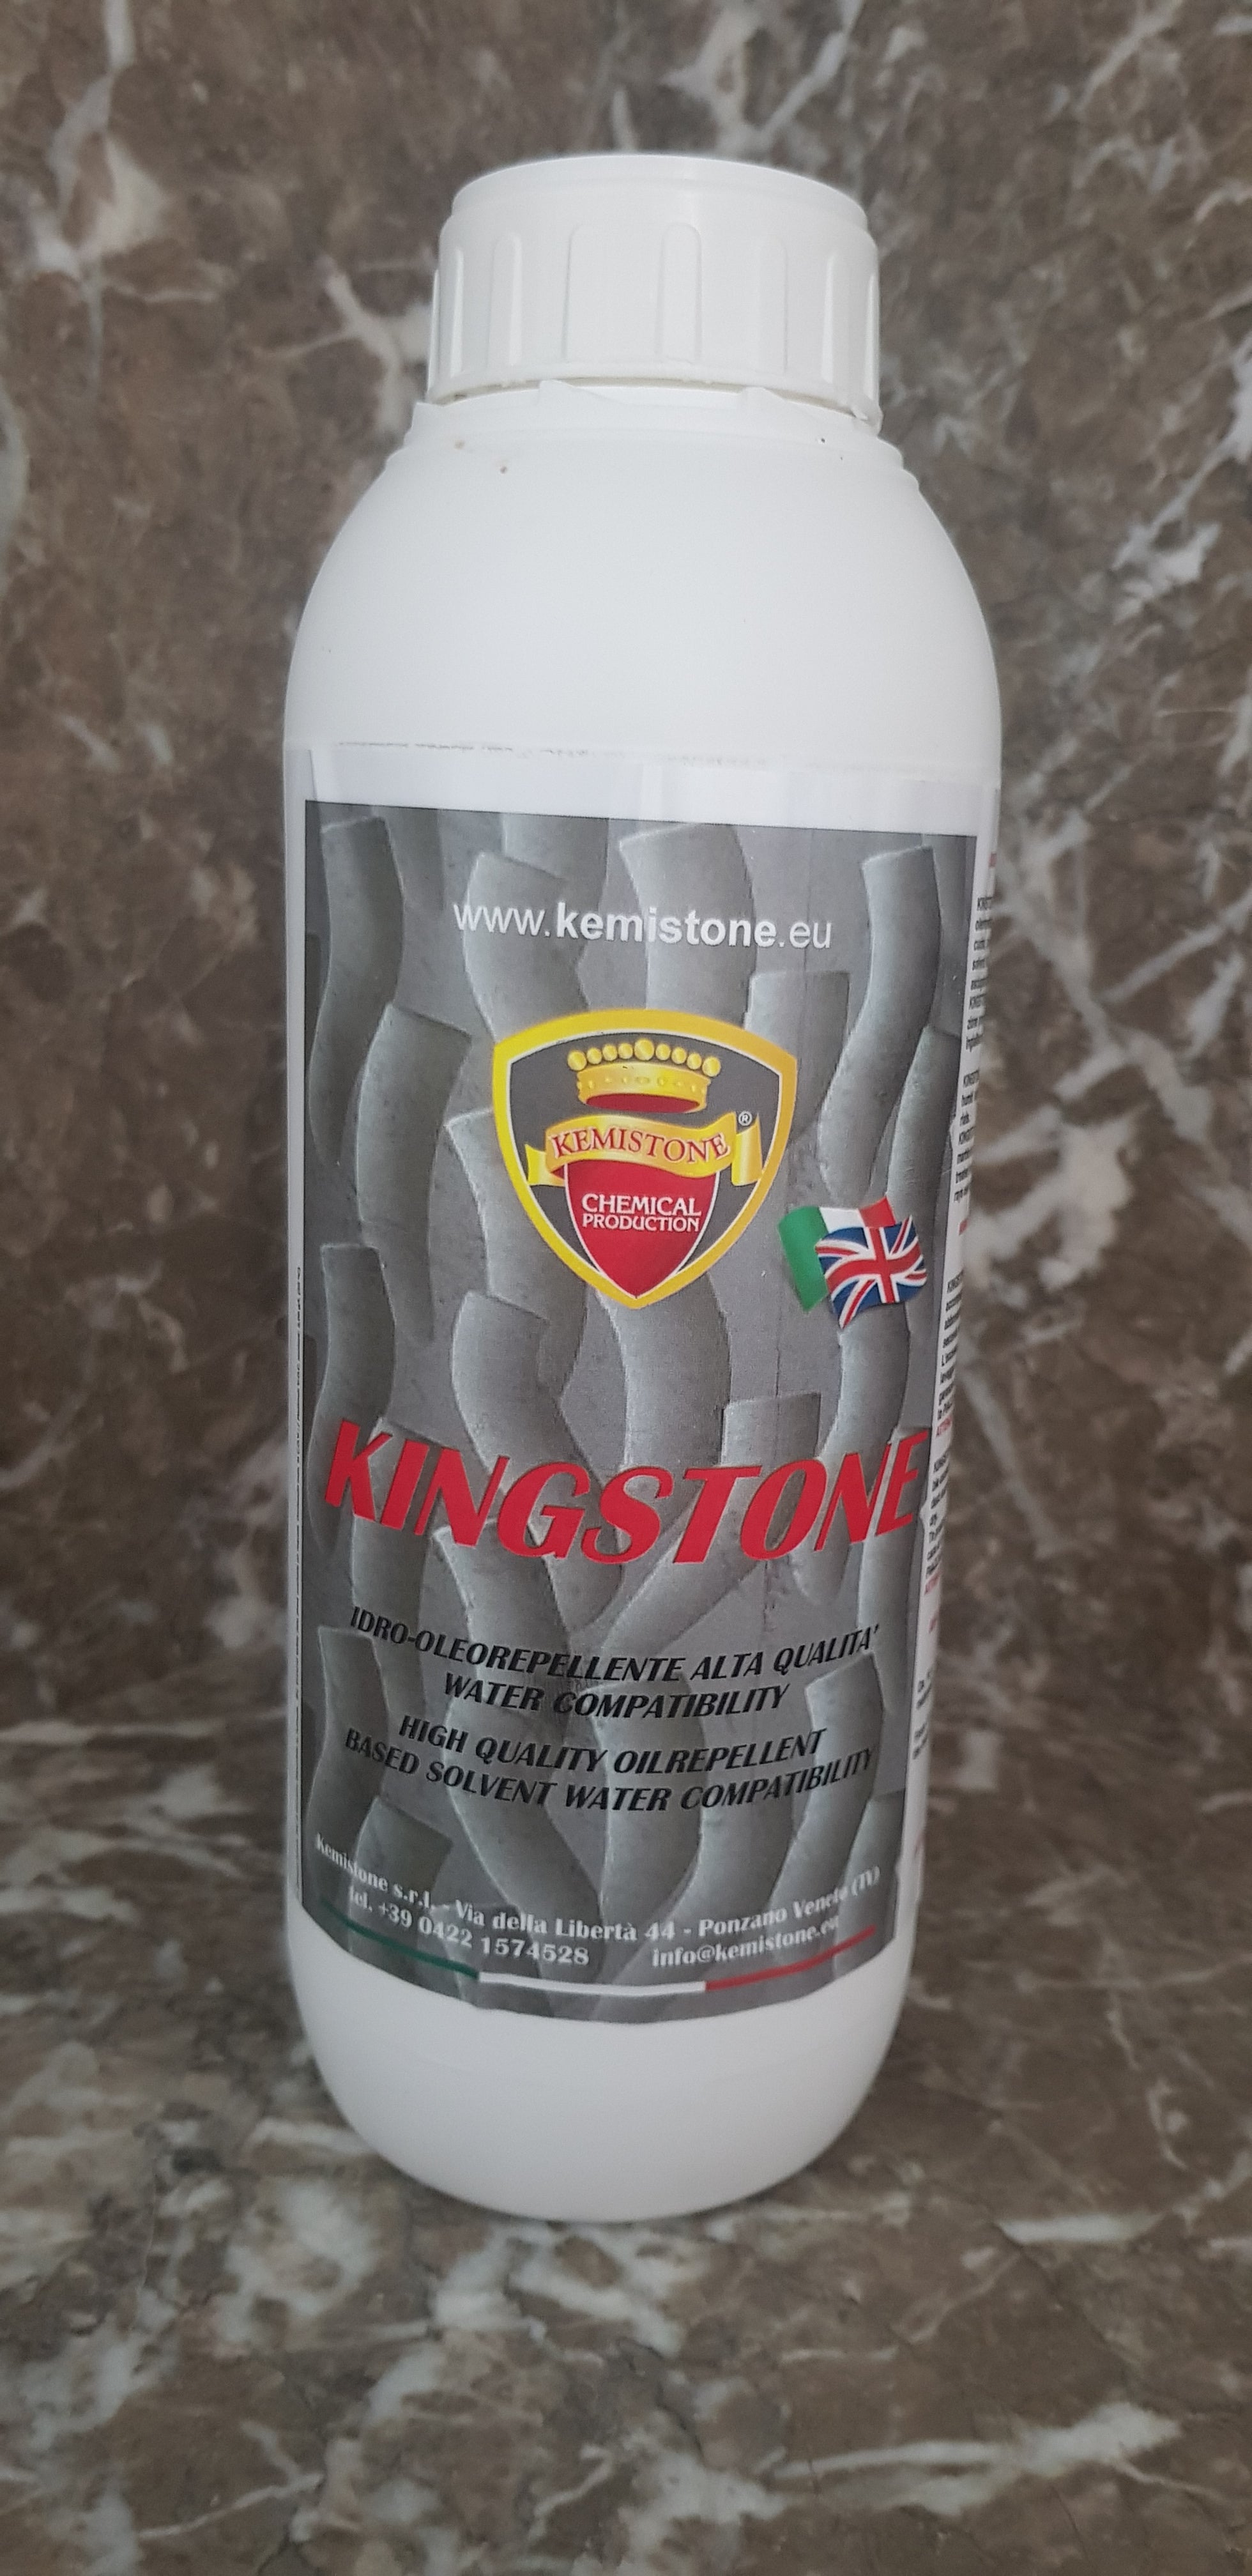 Kingstone gives outstanding water and oil repellent characteristics to the material being treated. It can be used to protect any application in marble, stone, limestone, and stone composites. Kingstone will not change the feature of the surface of the stone or its colour. It has an amber appearance but when applied is invisible, resistant to UV rays it will not discolour and is very durable.